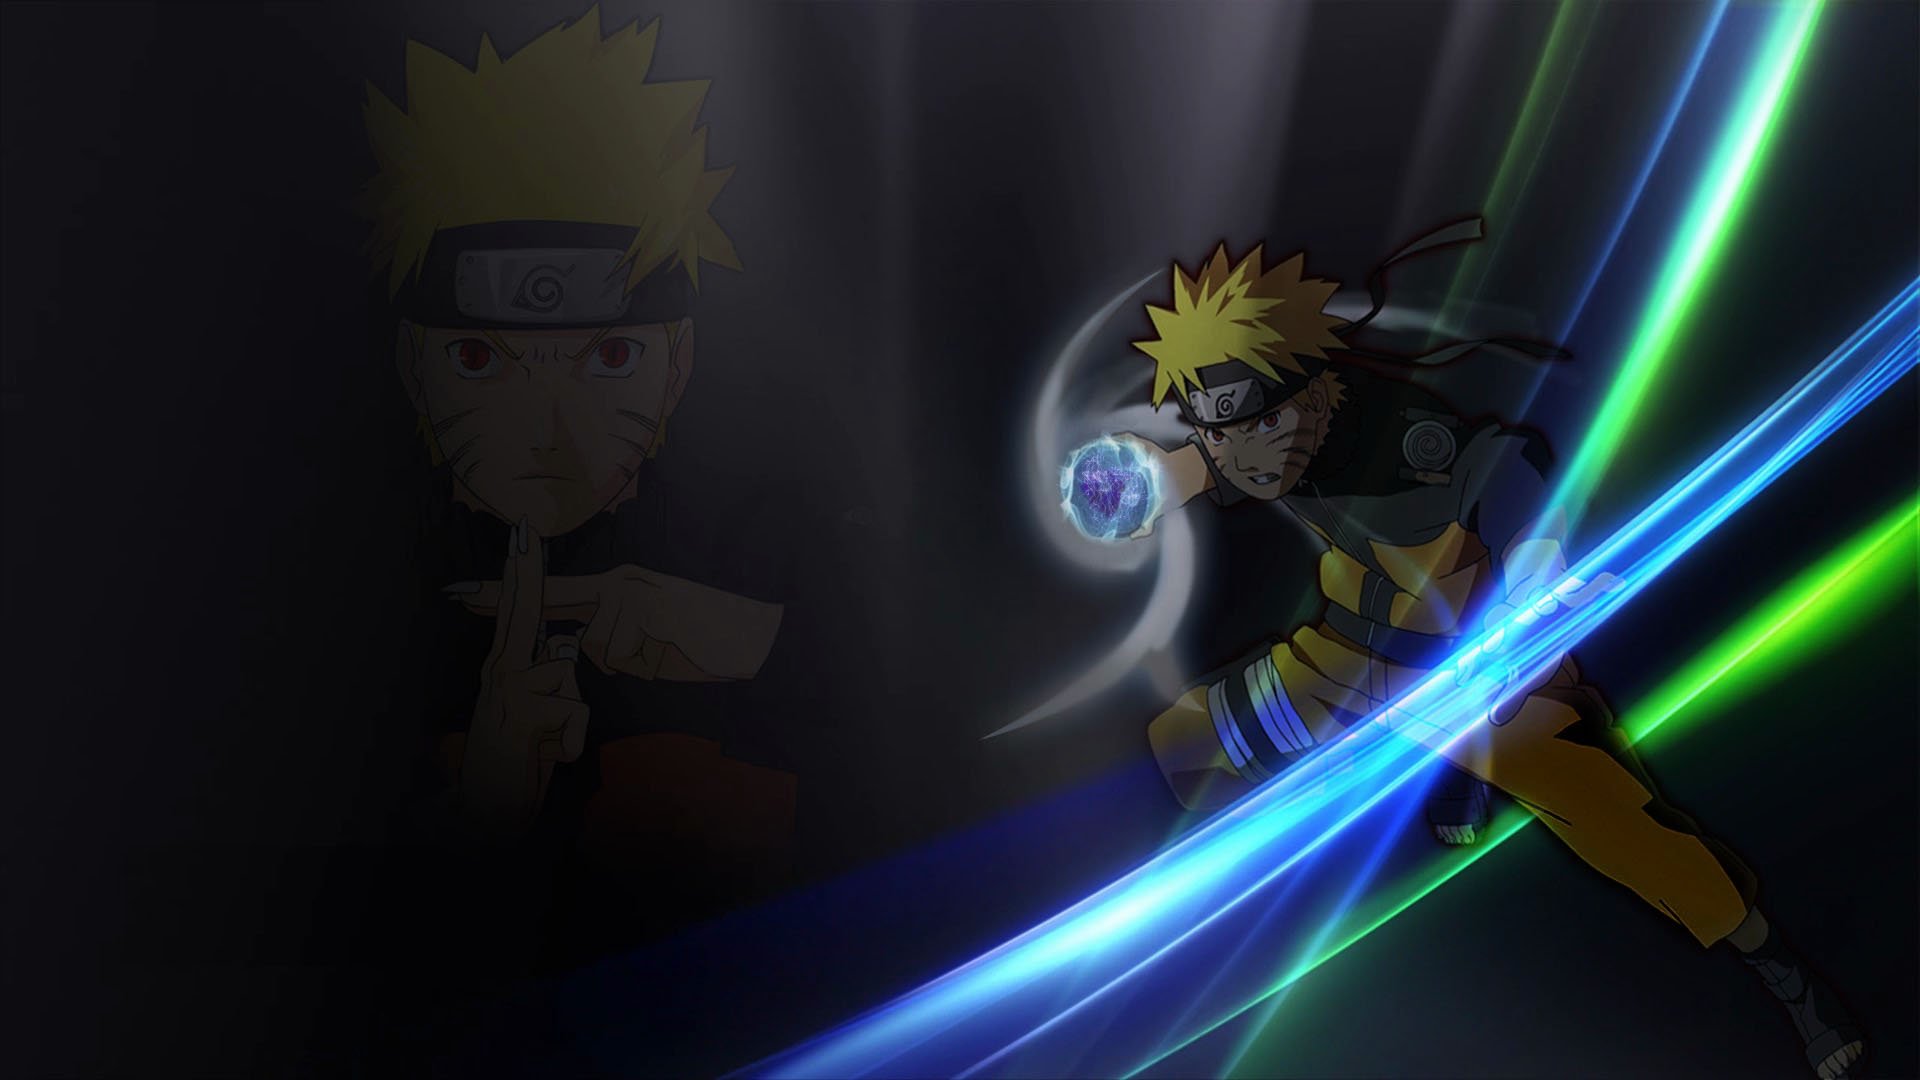 backgrounds gallery naruto wallpapers wallpaper 1920x1080 1920x1080